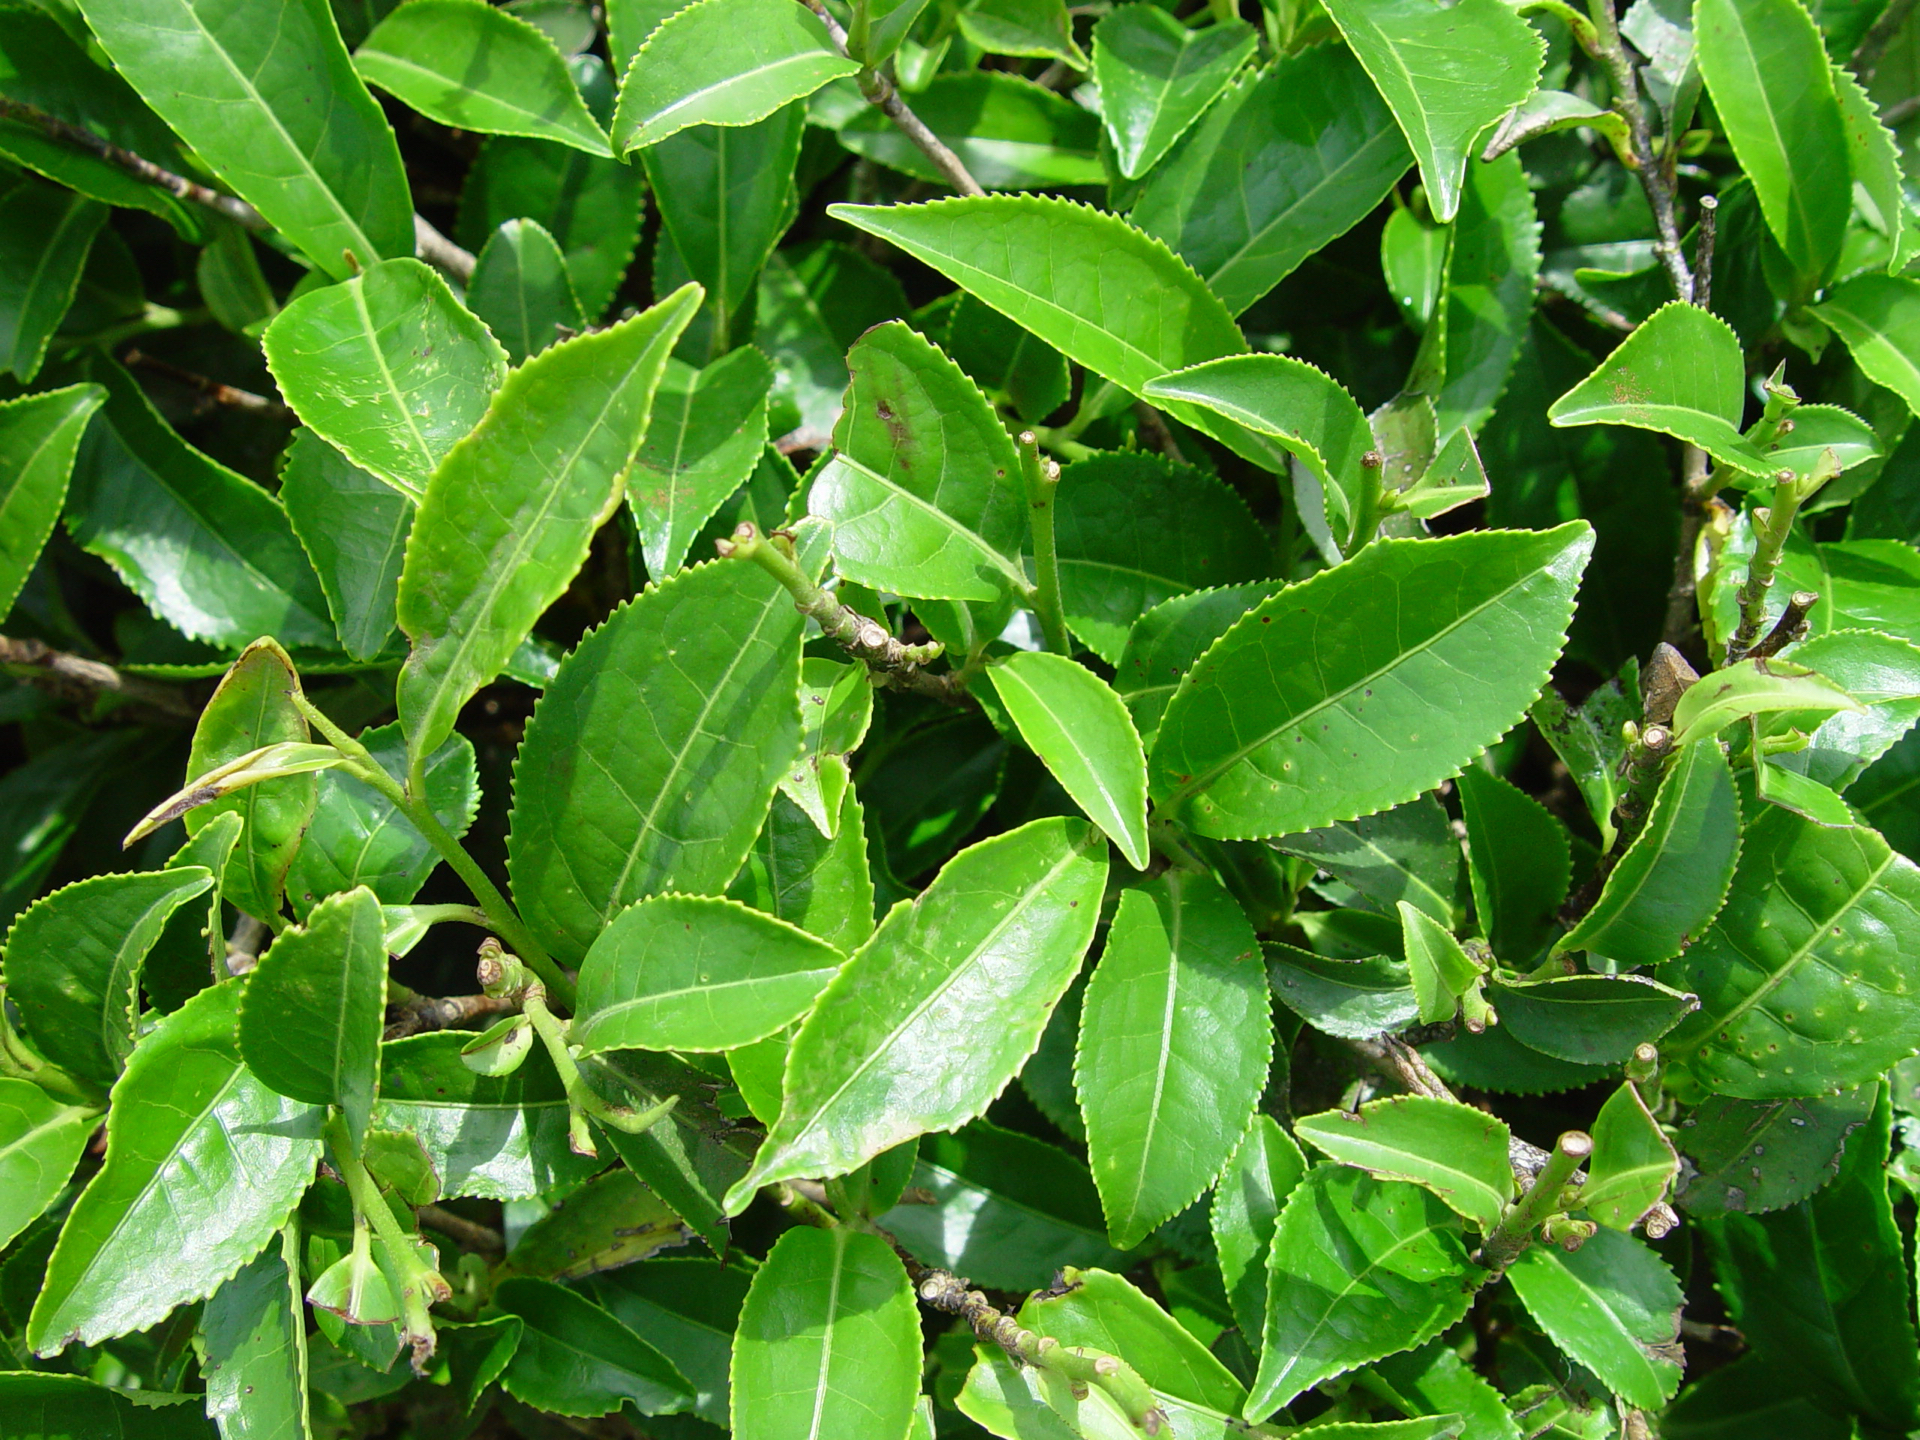  All true tea varietals are derived from the same plant, Camellia sinensis, and contain health-promoting compounds.